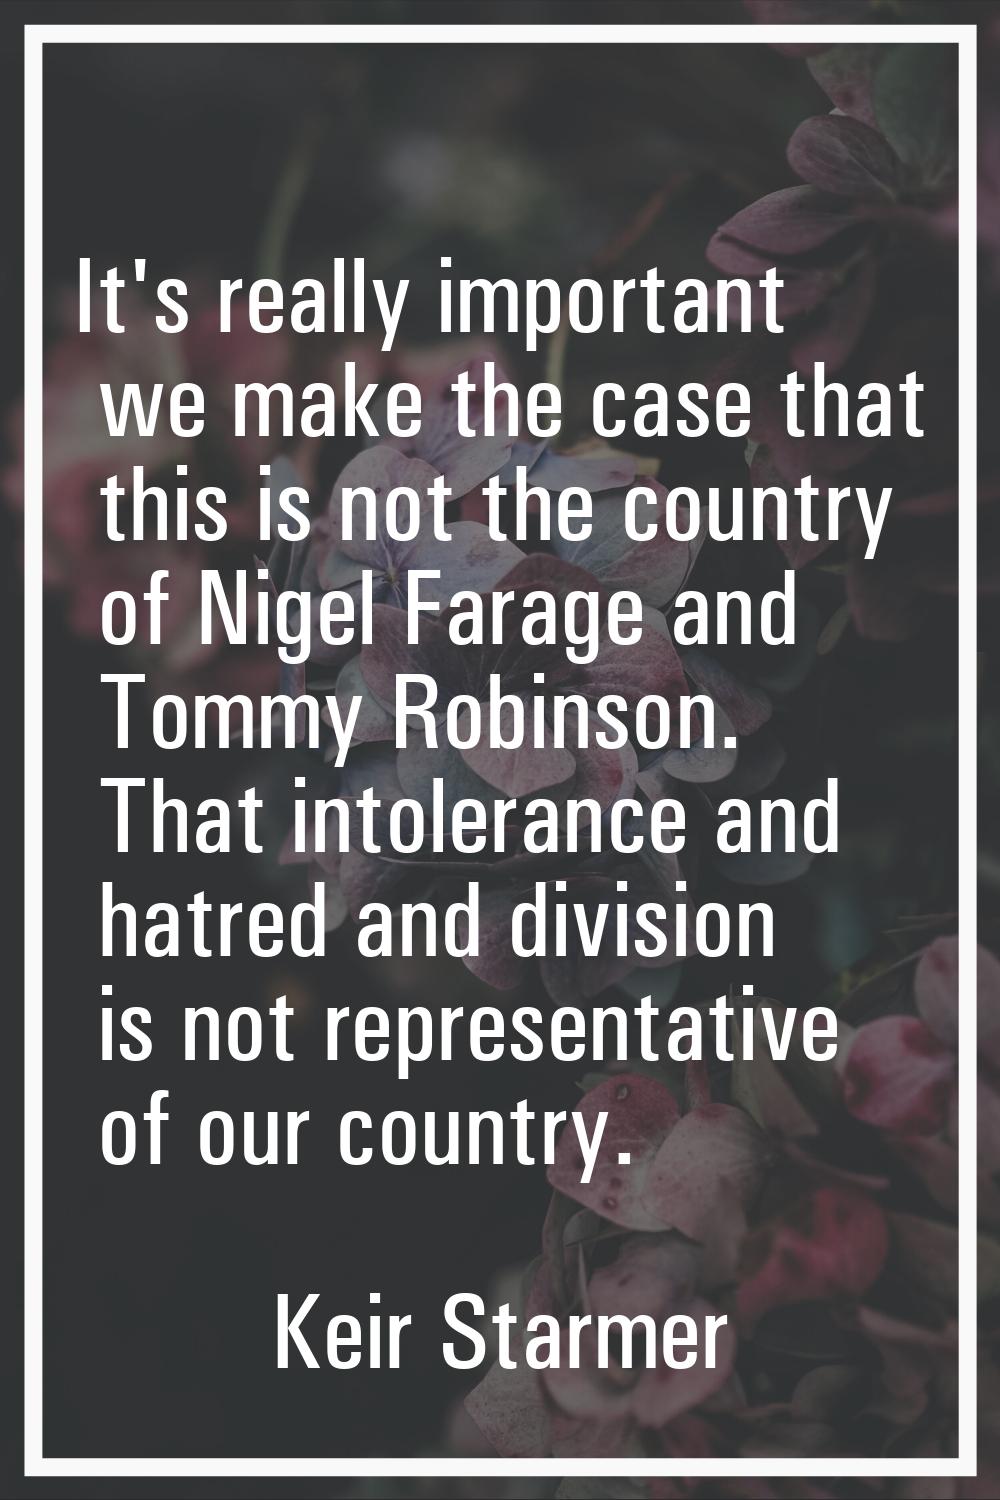 It's really important we make the case that this is not the country of Nigel Farage and Tommy Robin